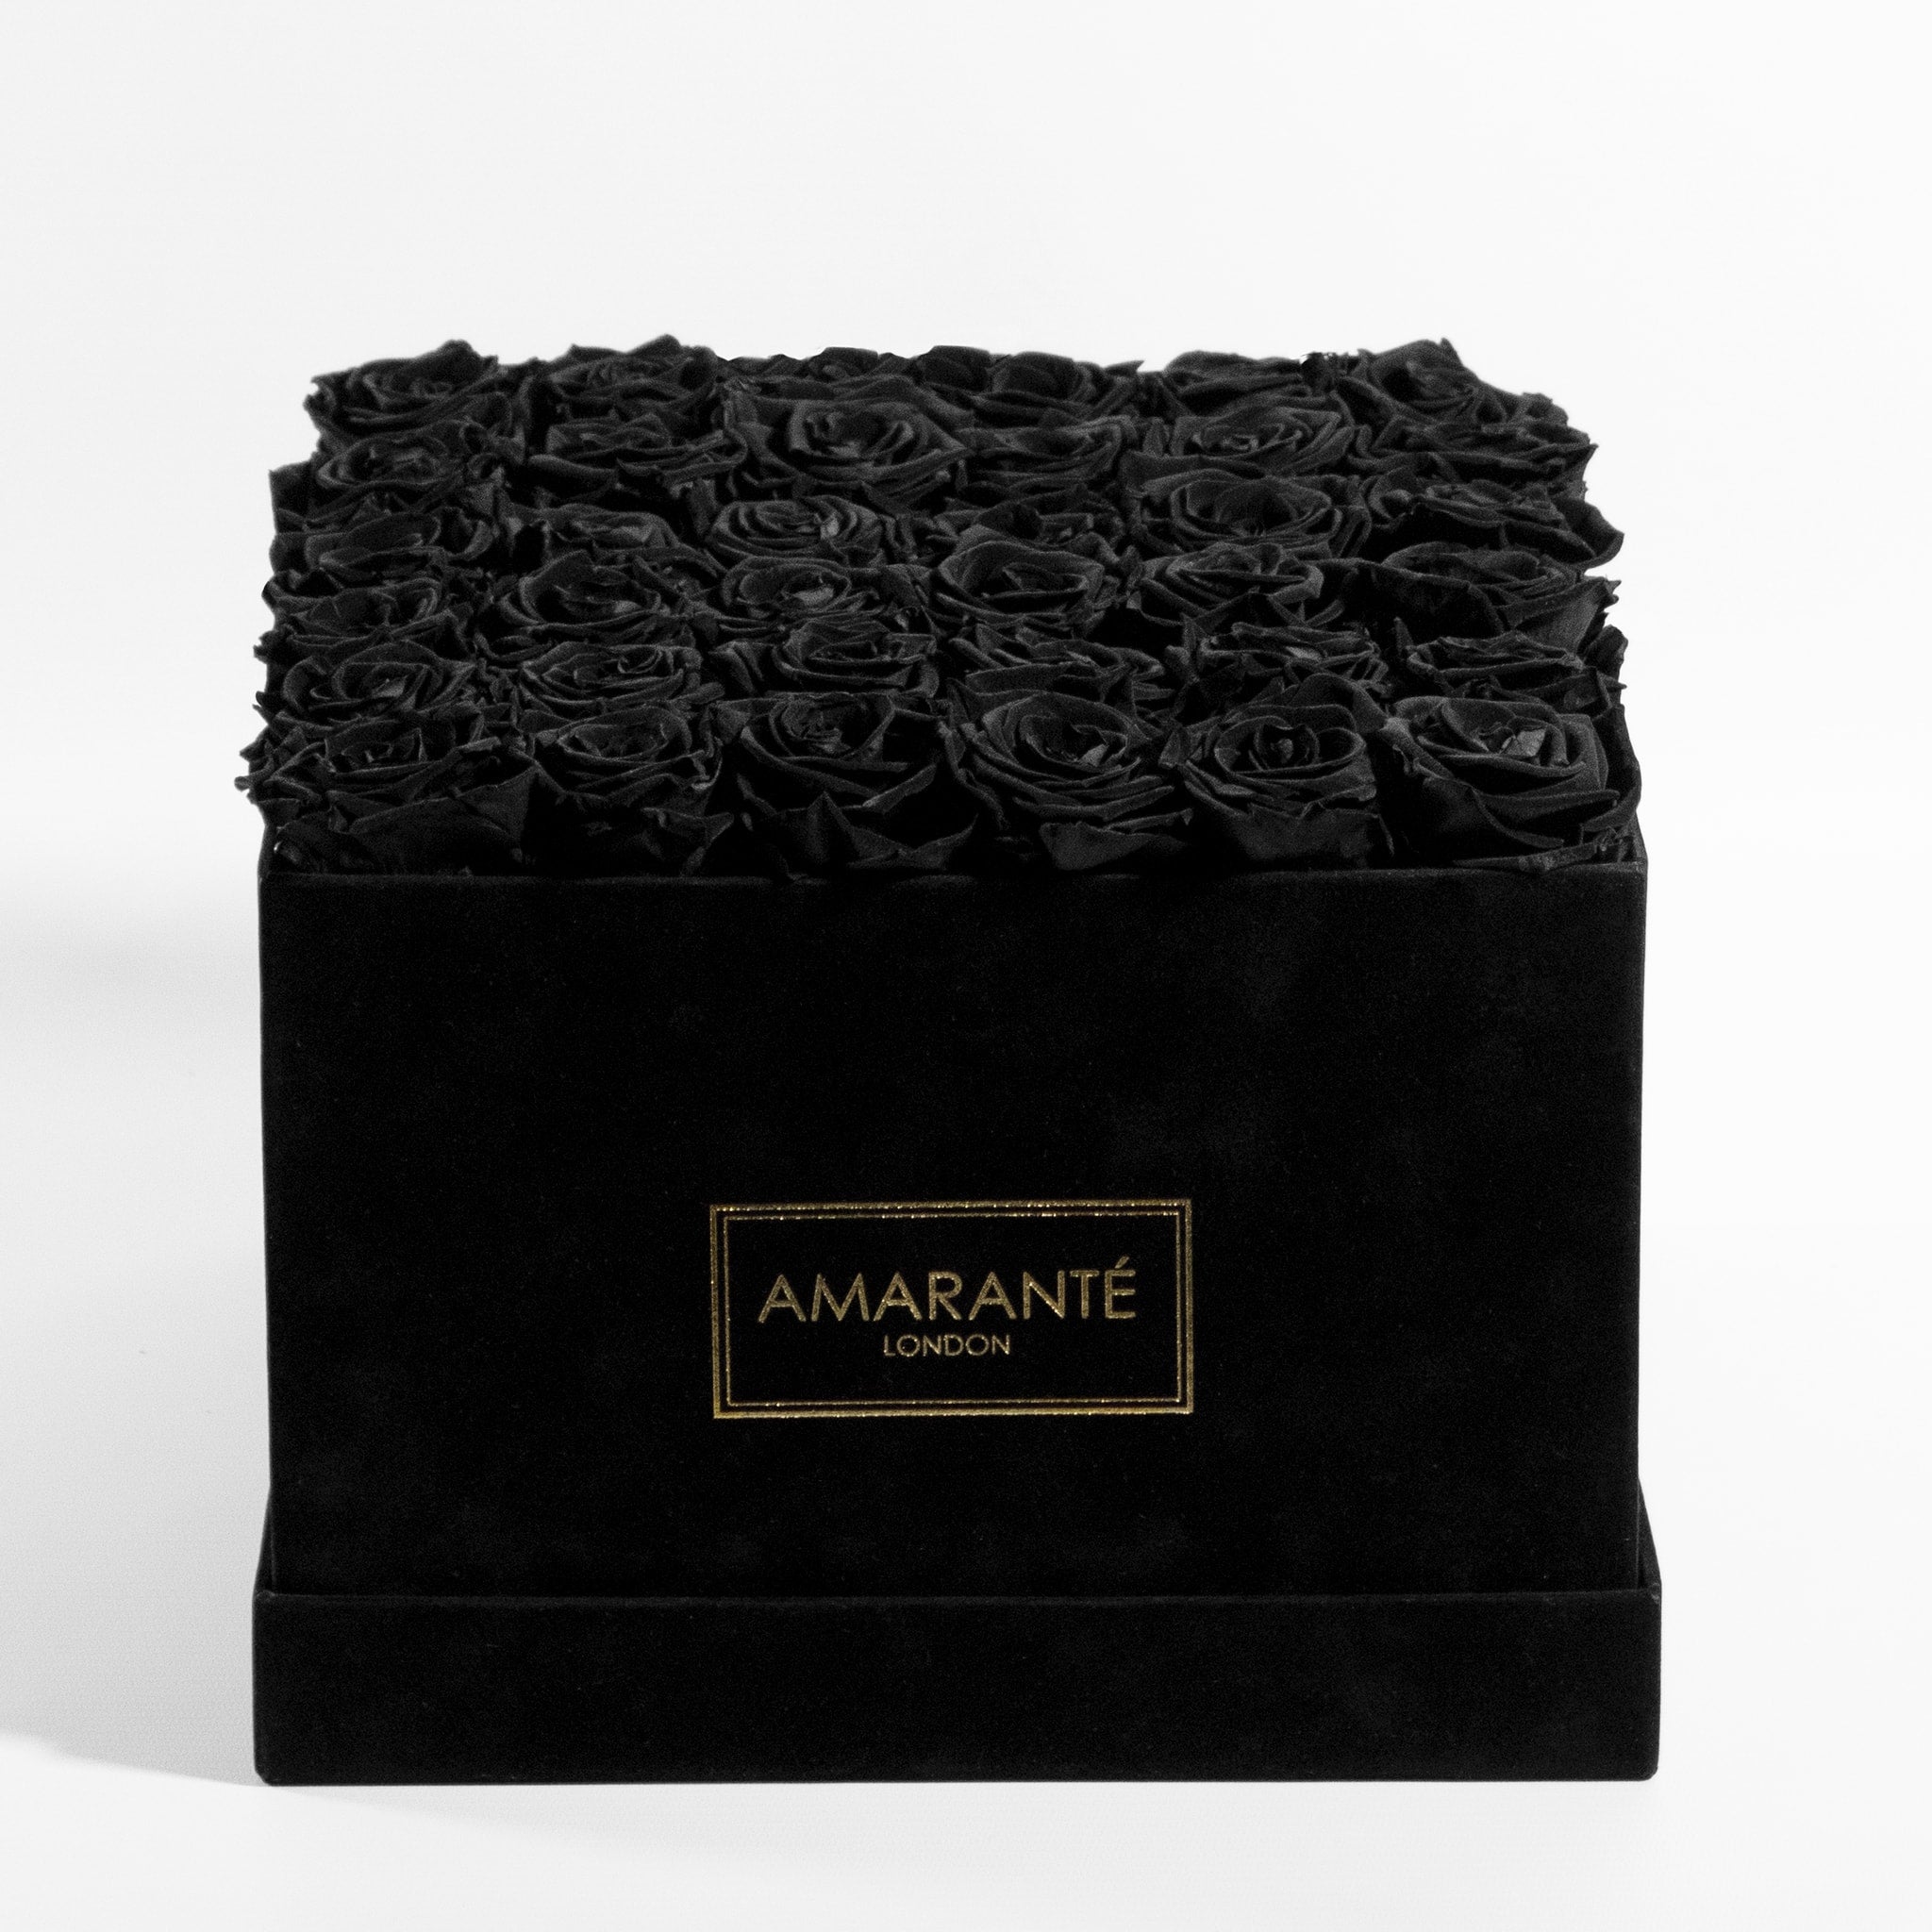 Go monochromatic with this stylish range of black Roses in a Black box.